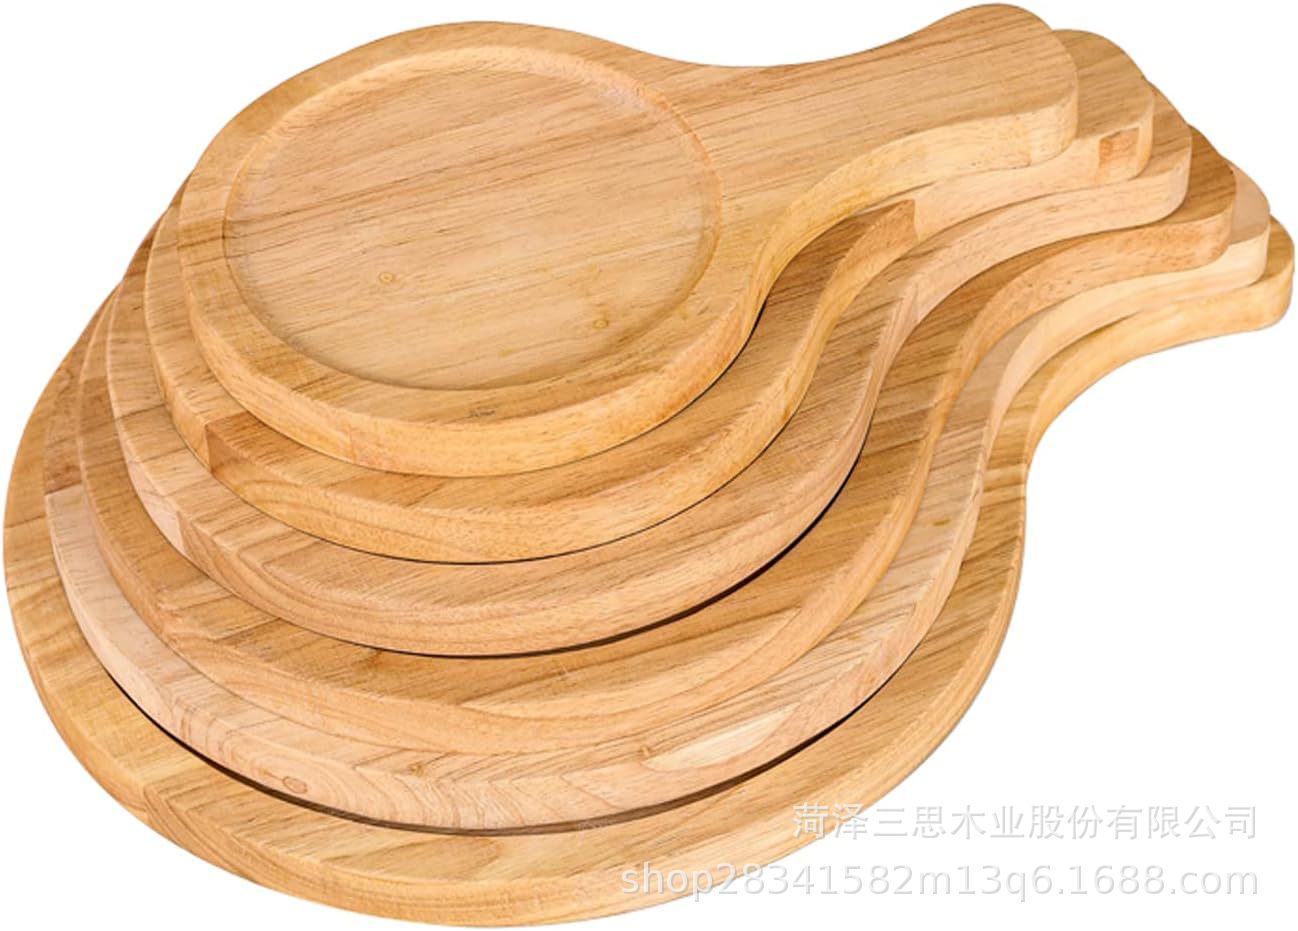 Wooden Pizza Plate Wooden Pizza Shovel Chopping Board round Tray for Bread Cheese Fruit Plate Solid Wood Bread Plate